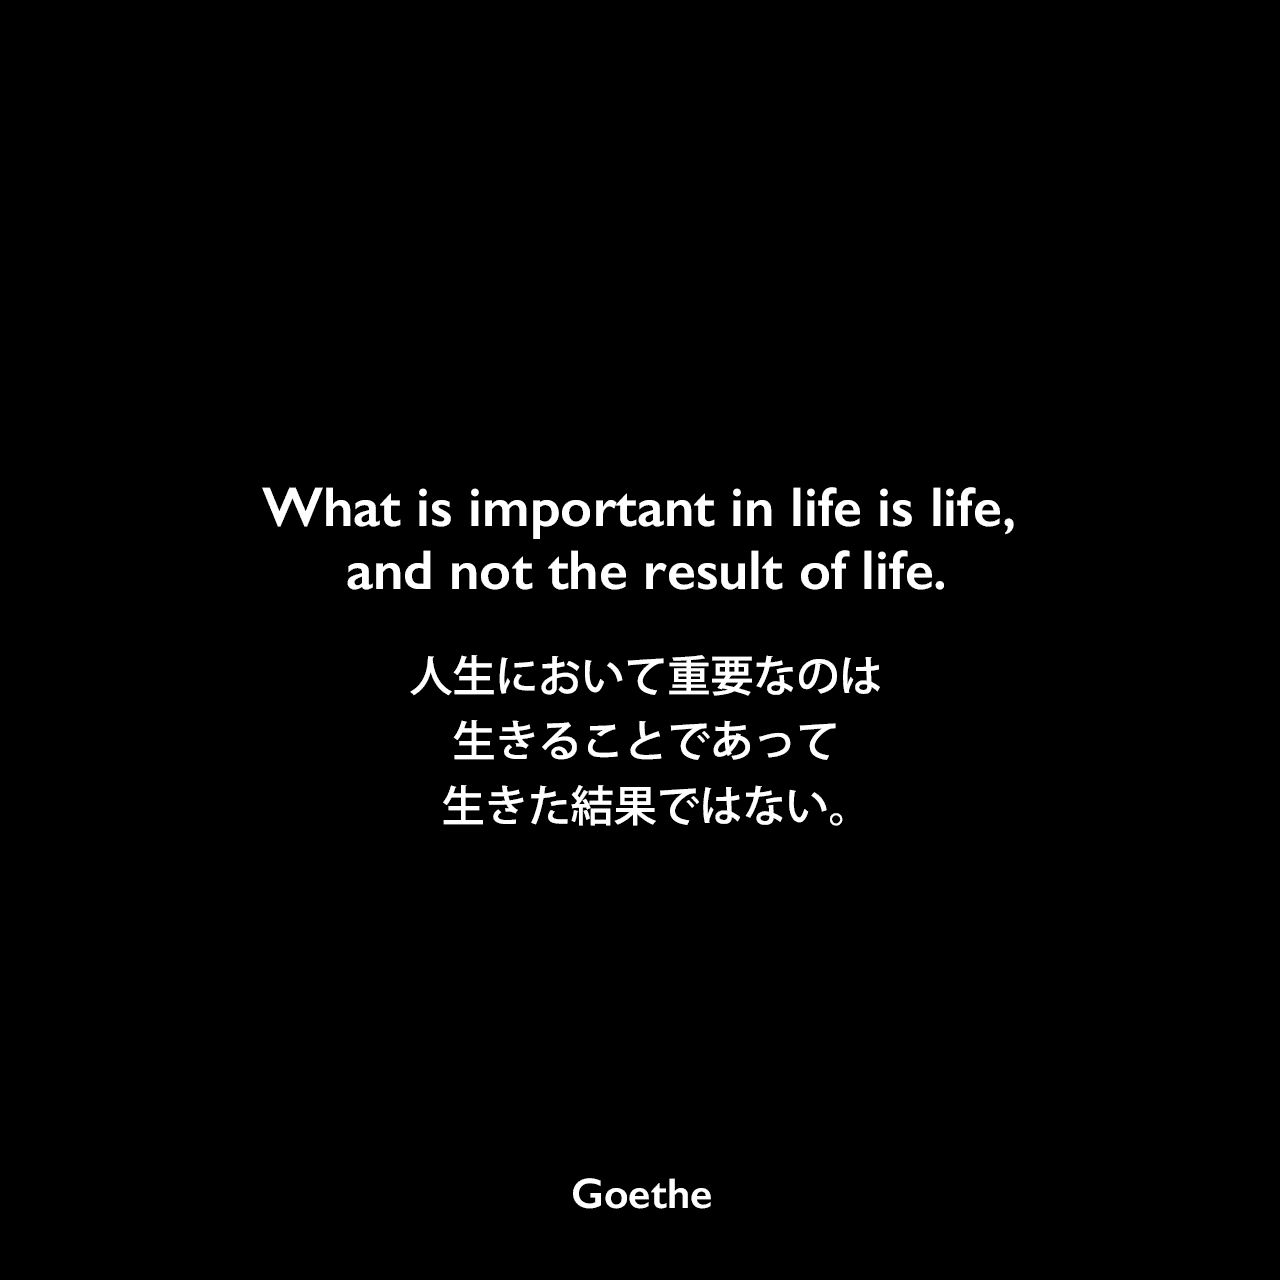 What is important in life is life, and not the result of life.人生において重要なのは生きることであって、生きた結果ではない。Johann Wolfgang von Goethe